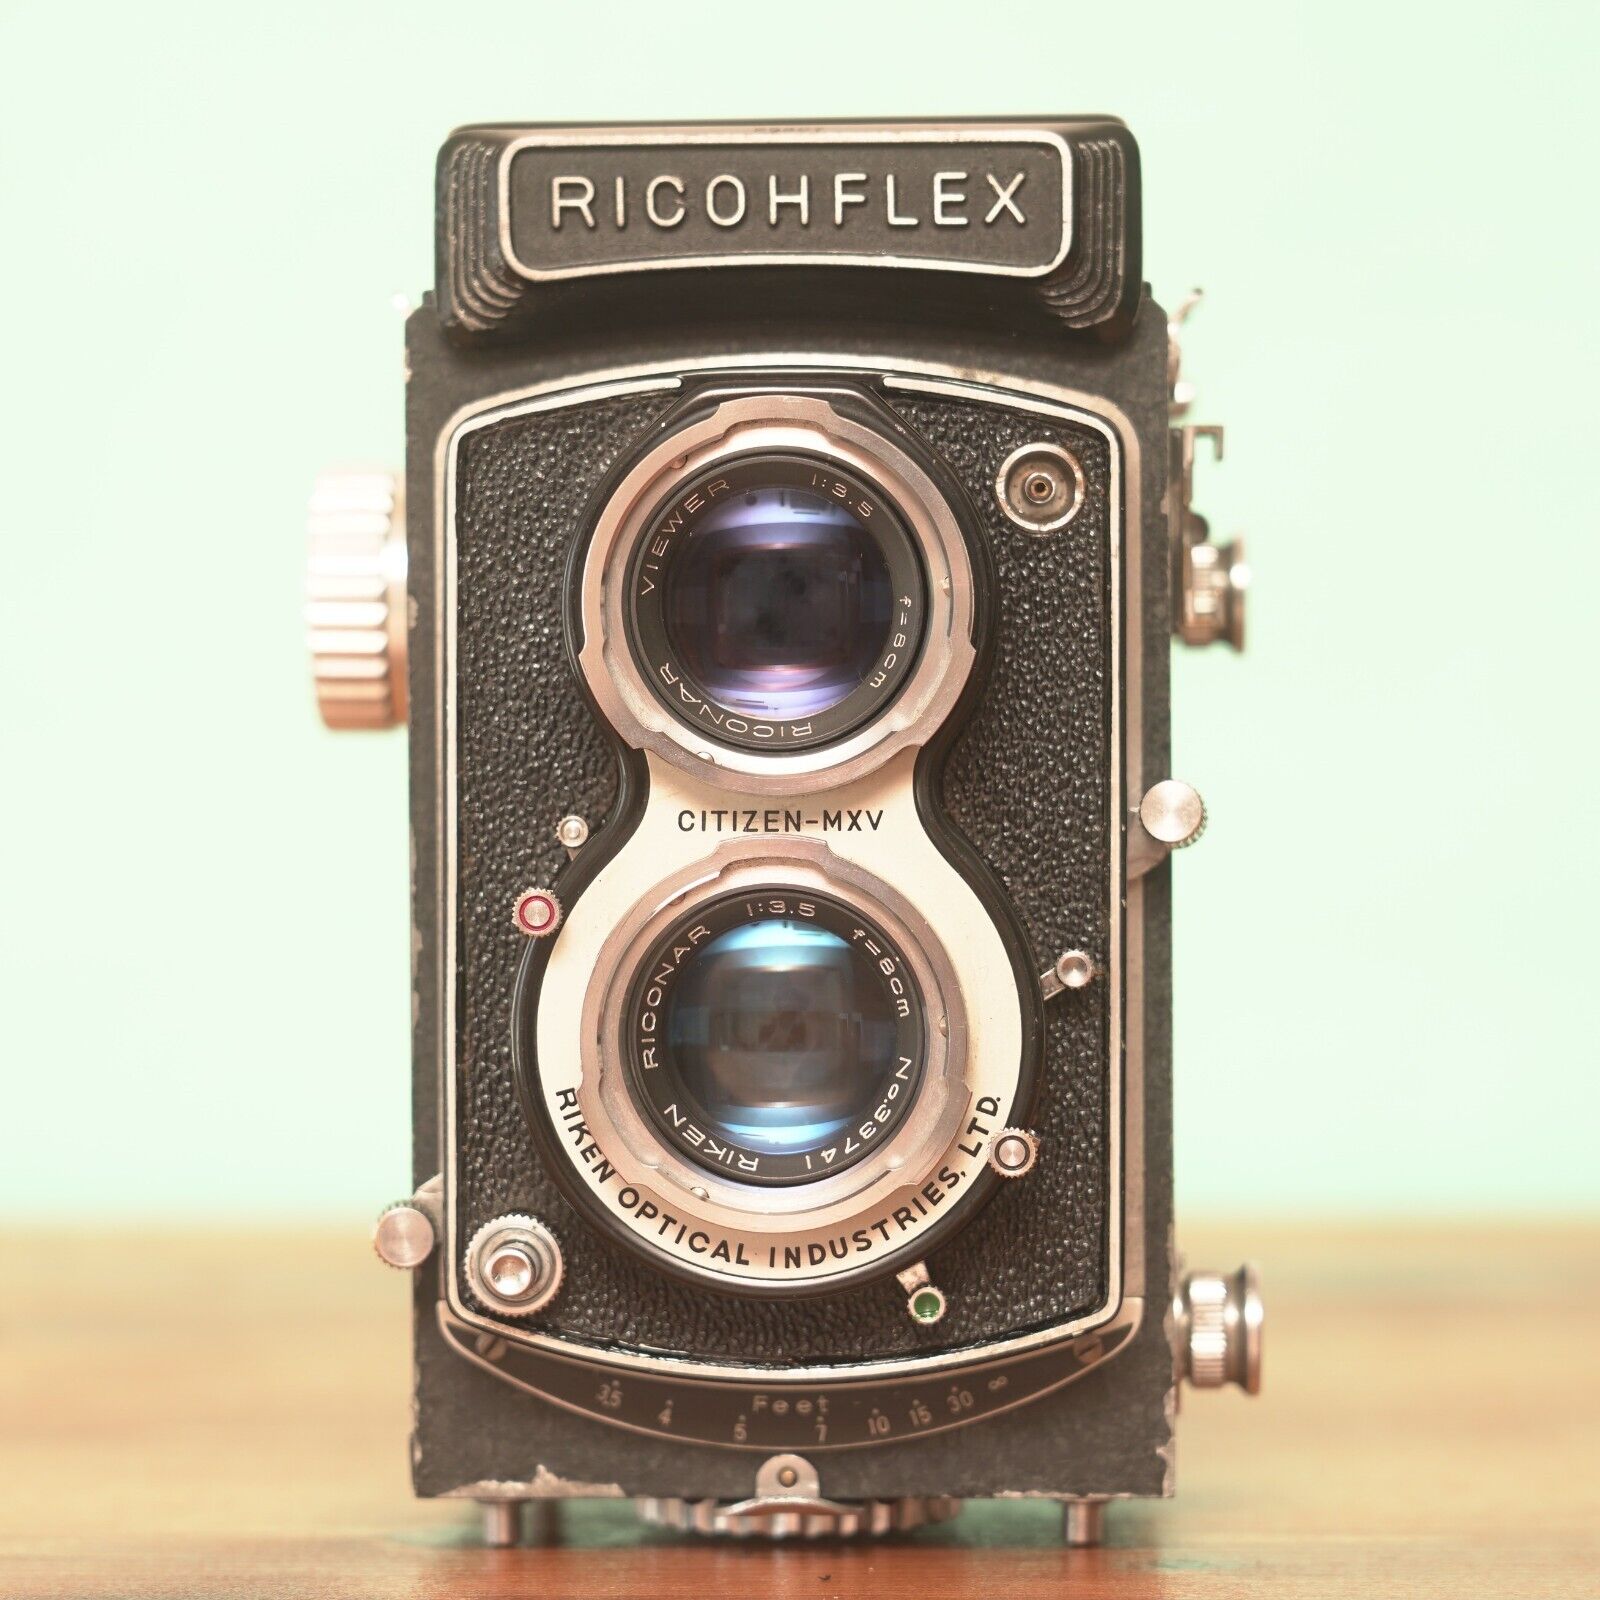 RICOH RICOHFLEX DIA 6x6 TLR FILM CAMERA CITIZEN-MXV 80mm f3.5 from 